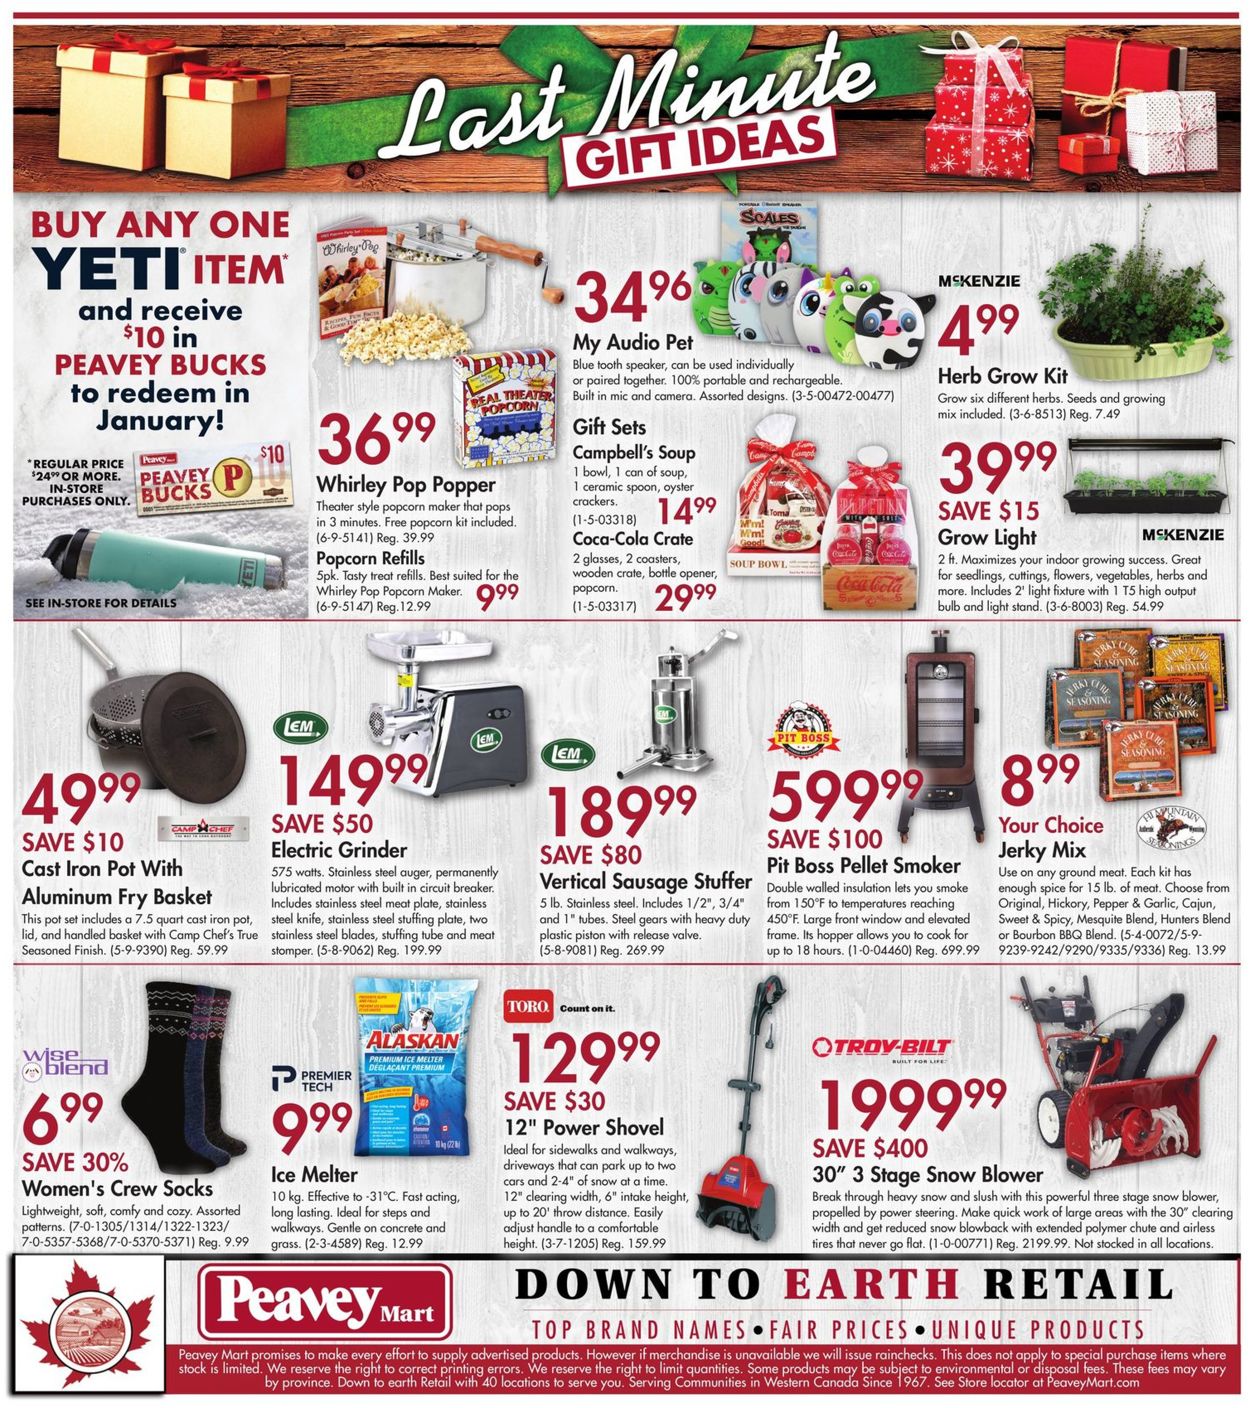 Peavey Mart CHRISTMAS GIFT IDEAS 2019 Flyer - 12/12-12/22/2019 (Page 8)